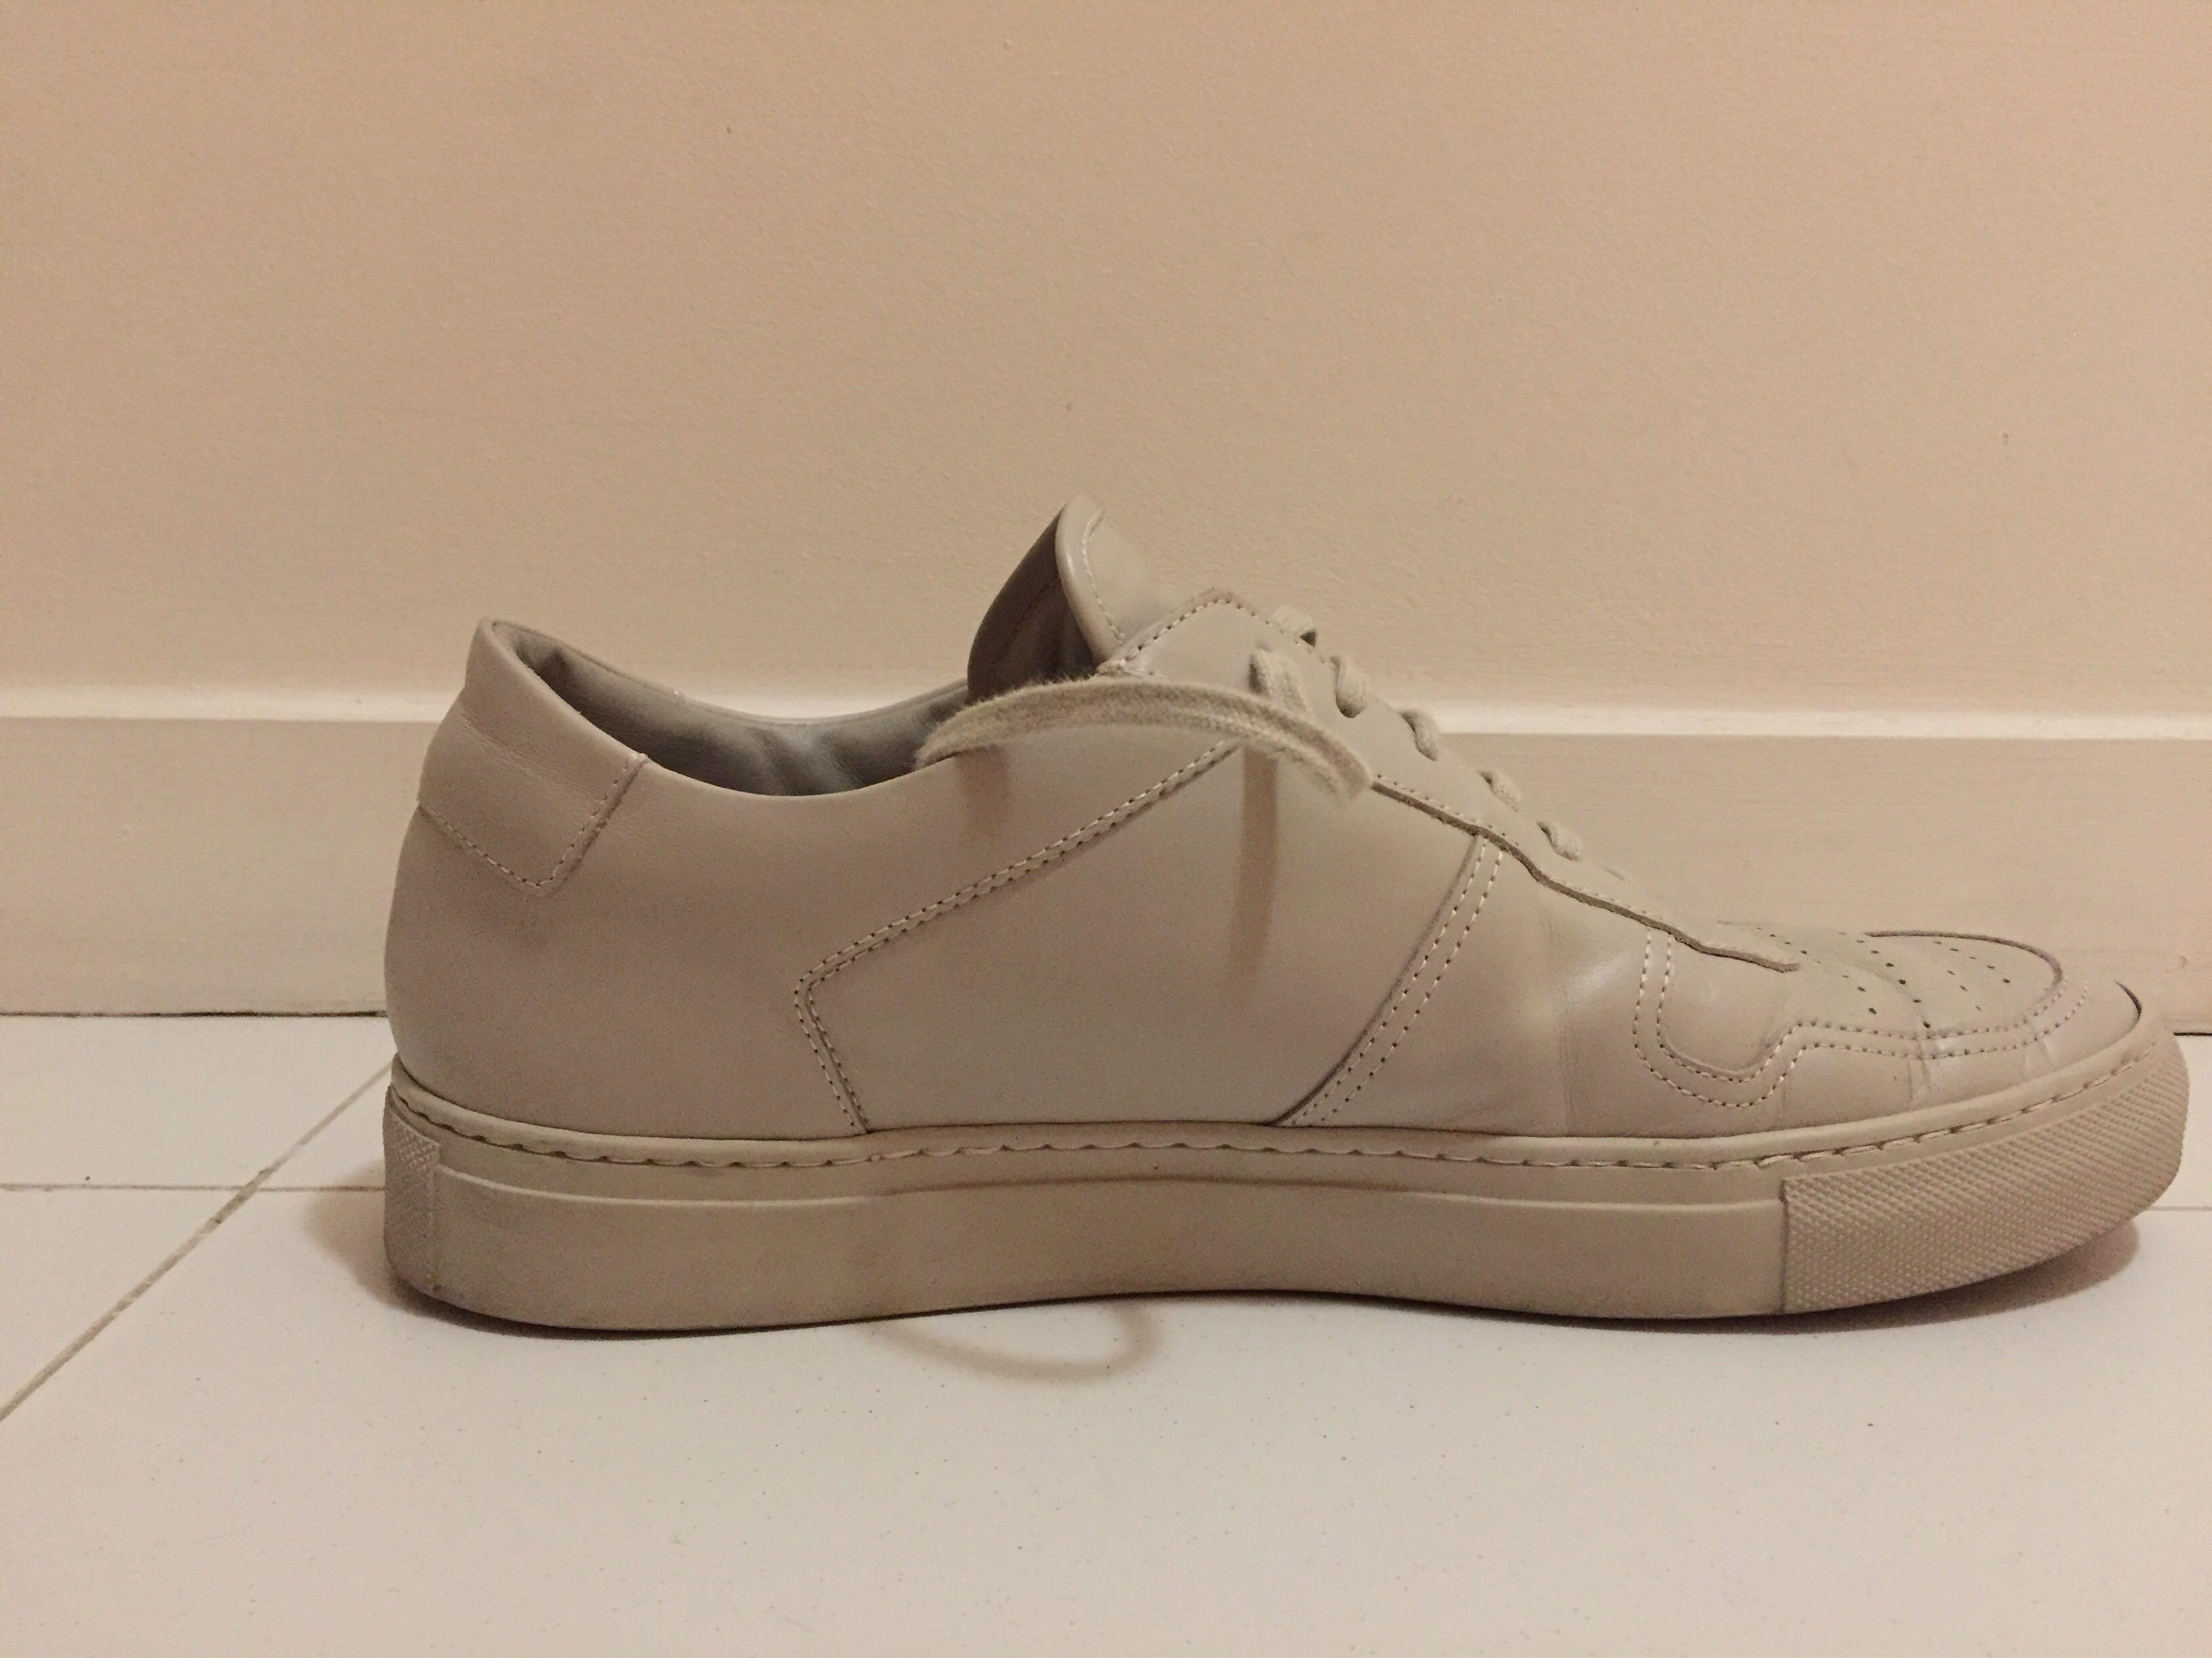 common projects bball grey